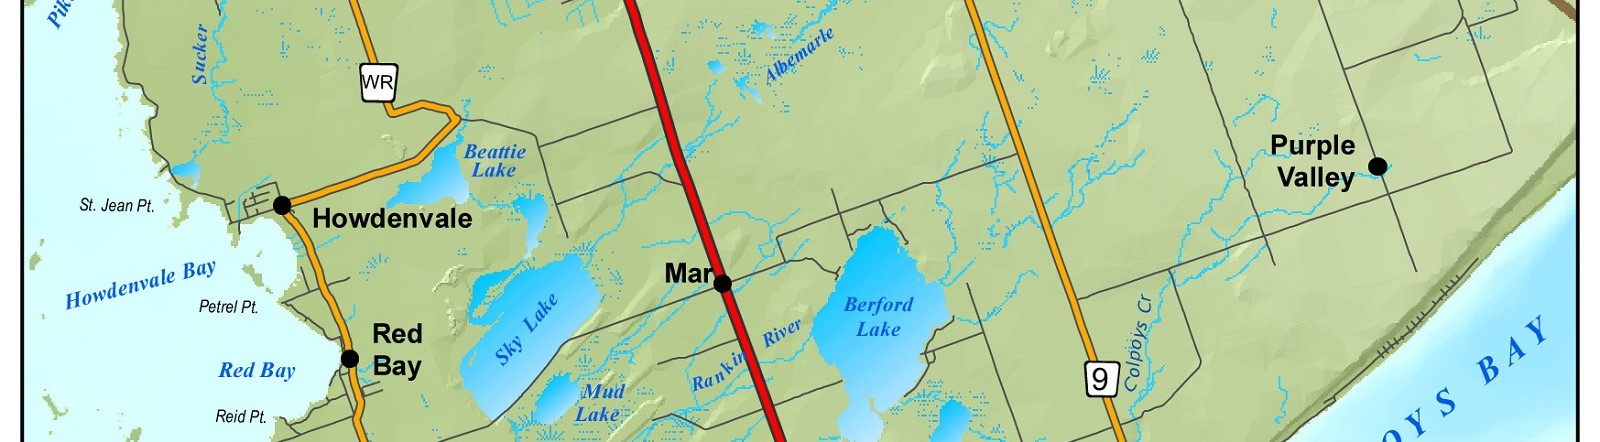 Photo of map showing Red Bay, Mar, Purple Valley and Howdenvale